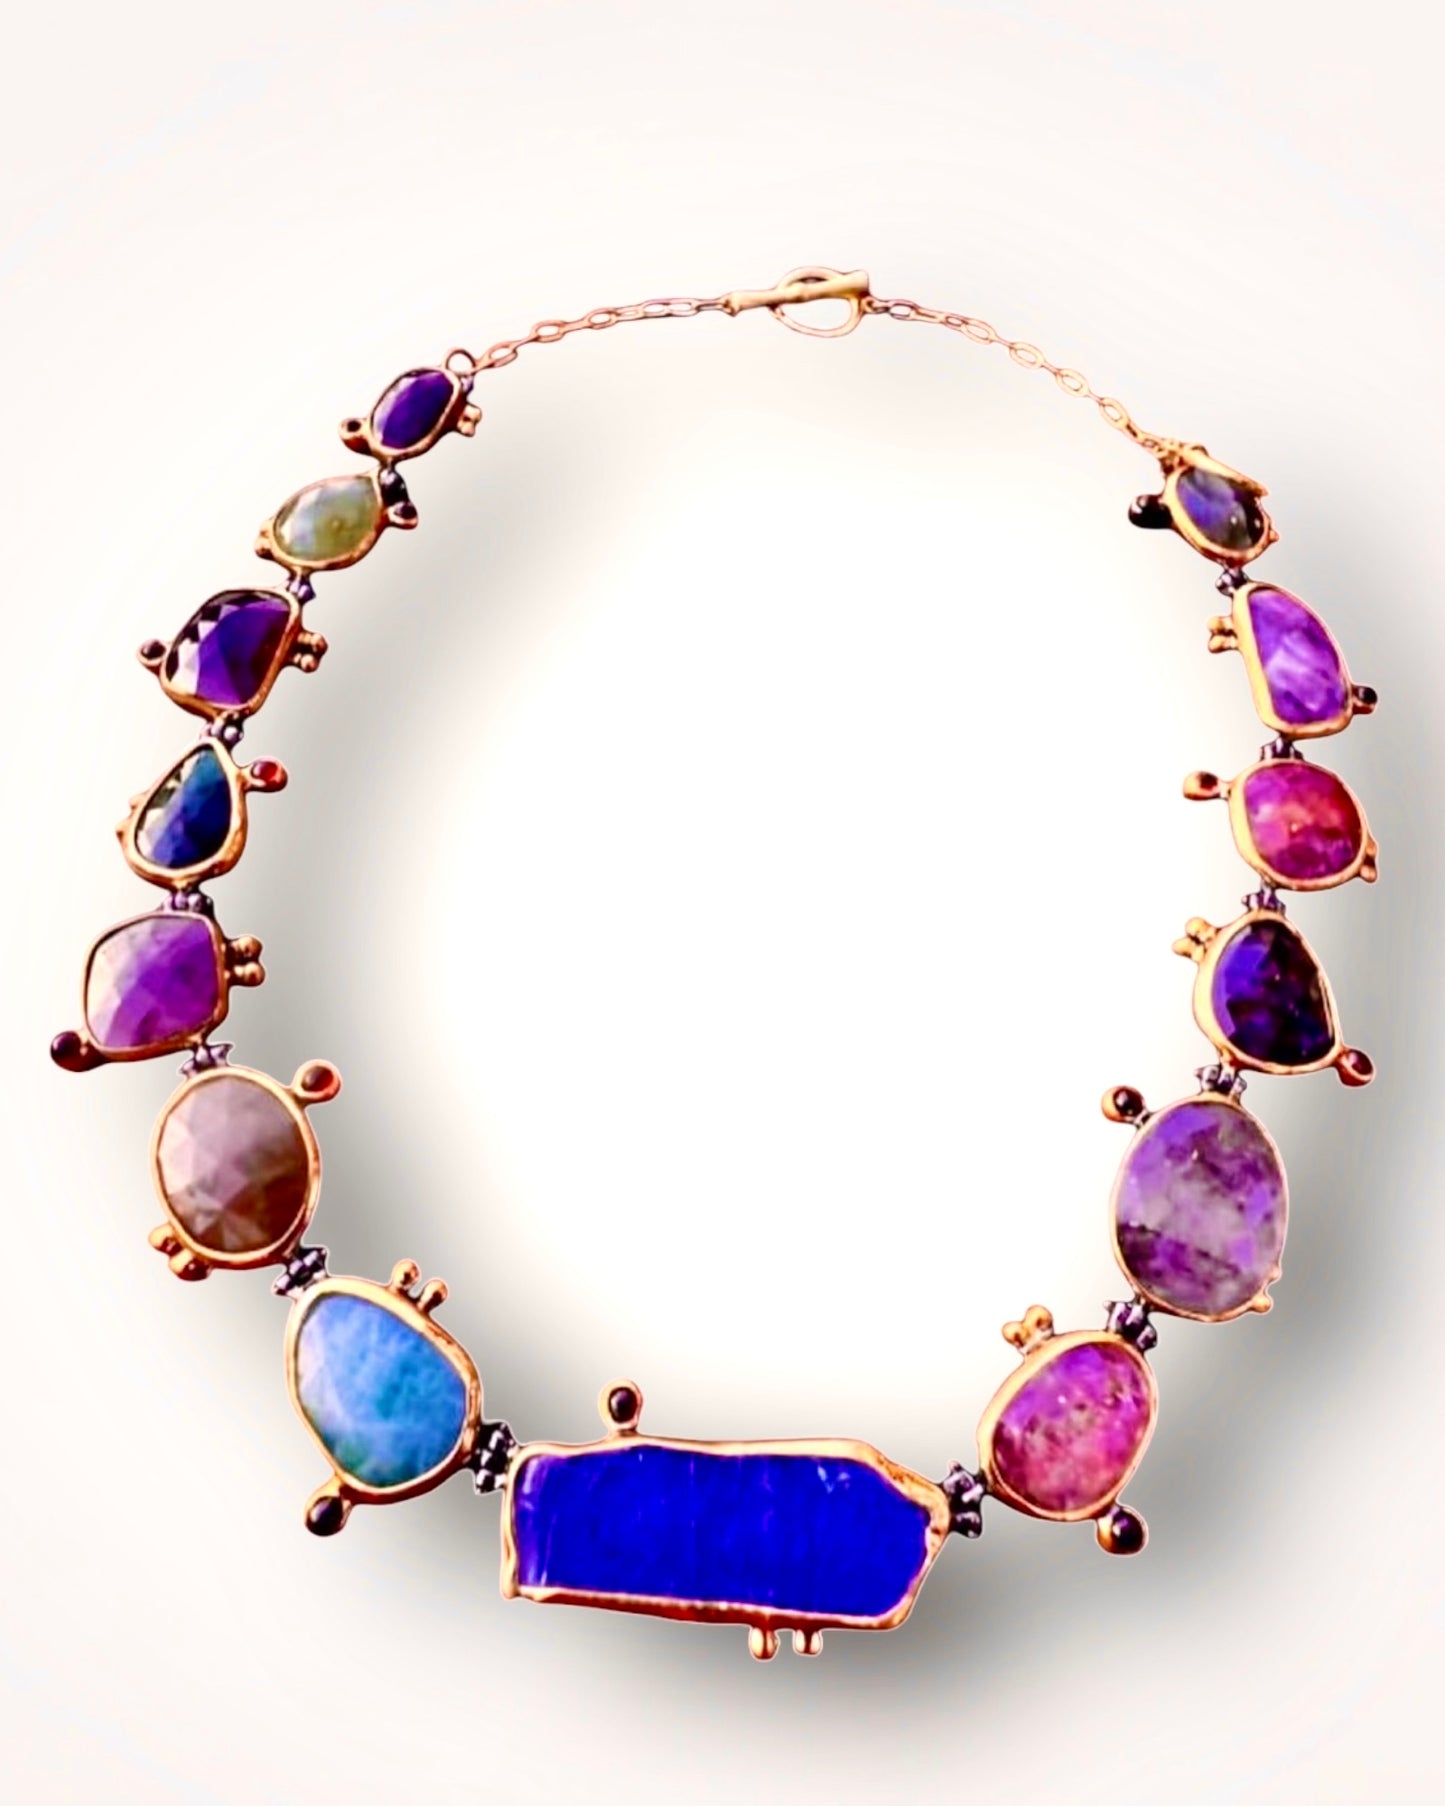 Gold Necklace with Precious Stones